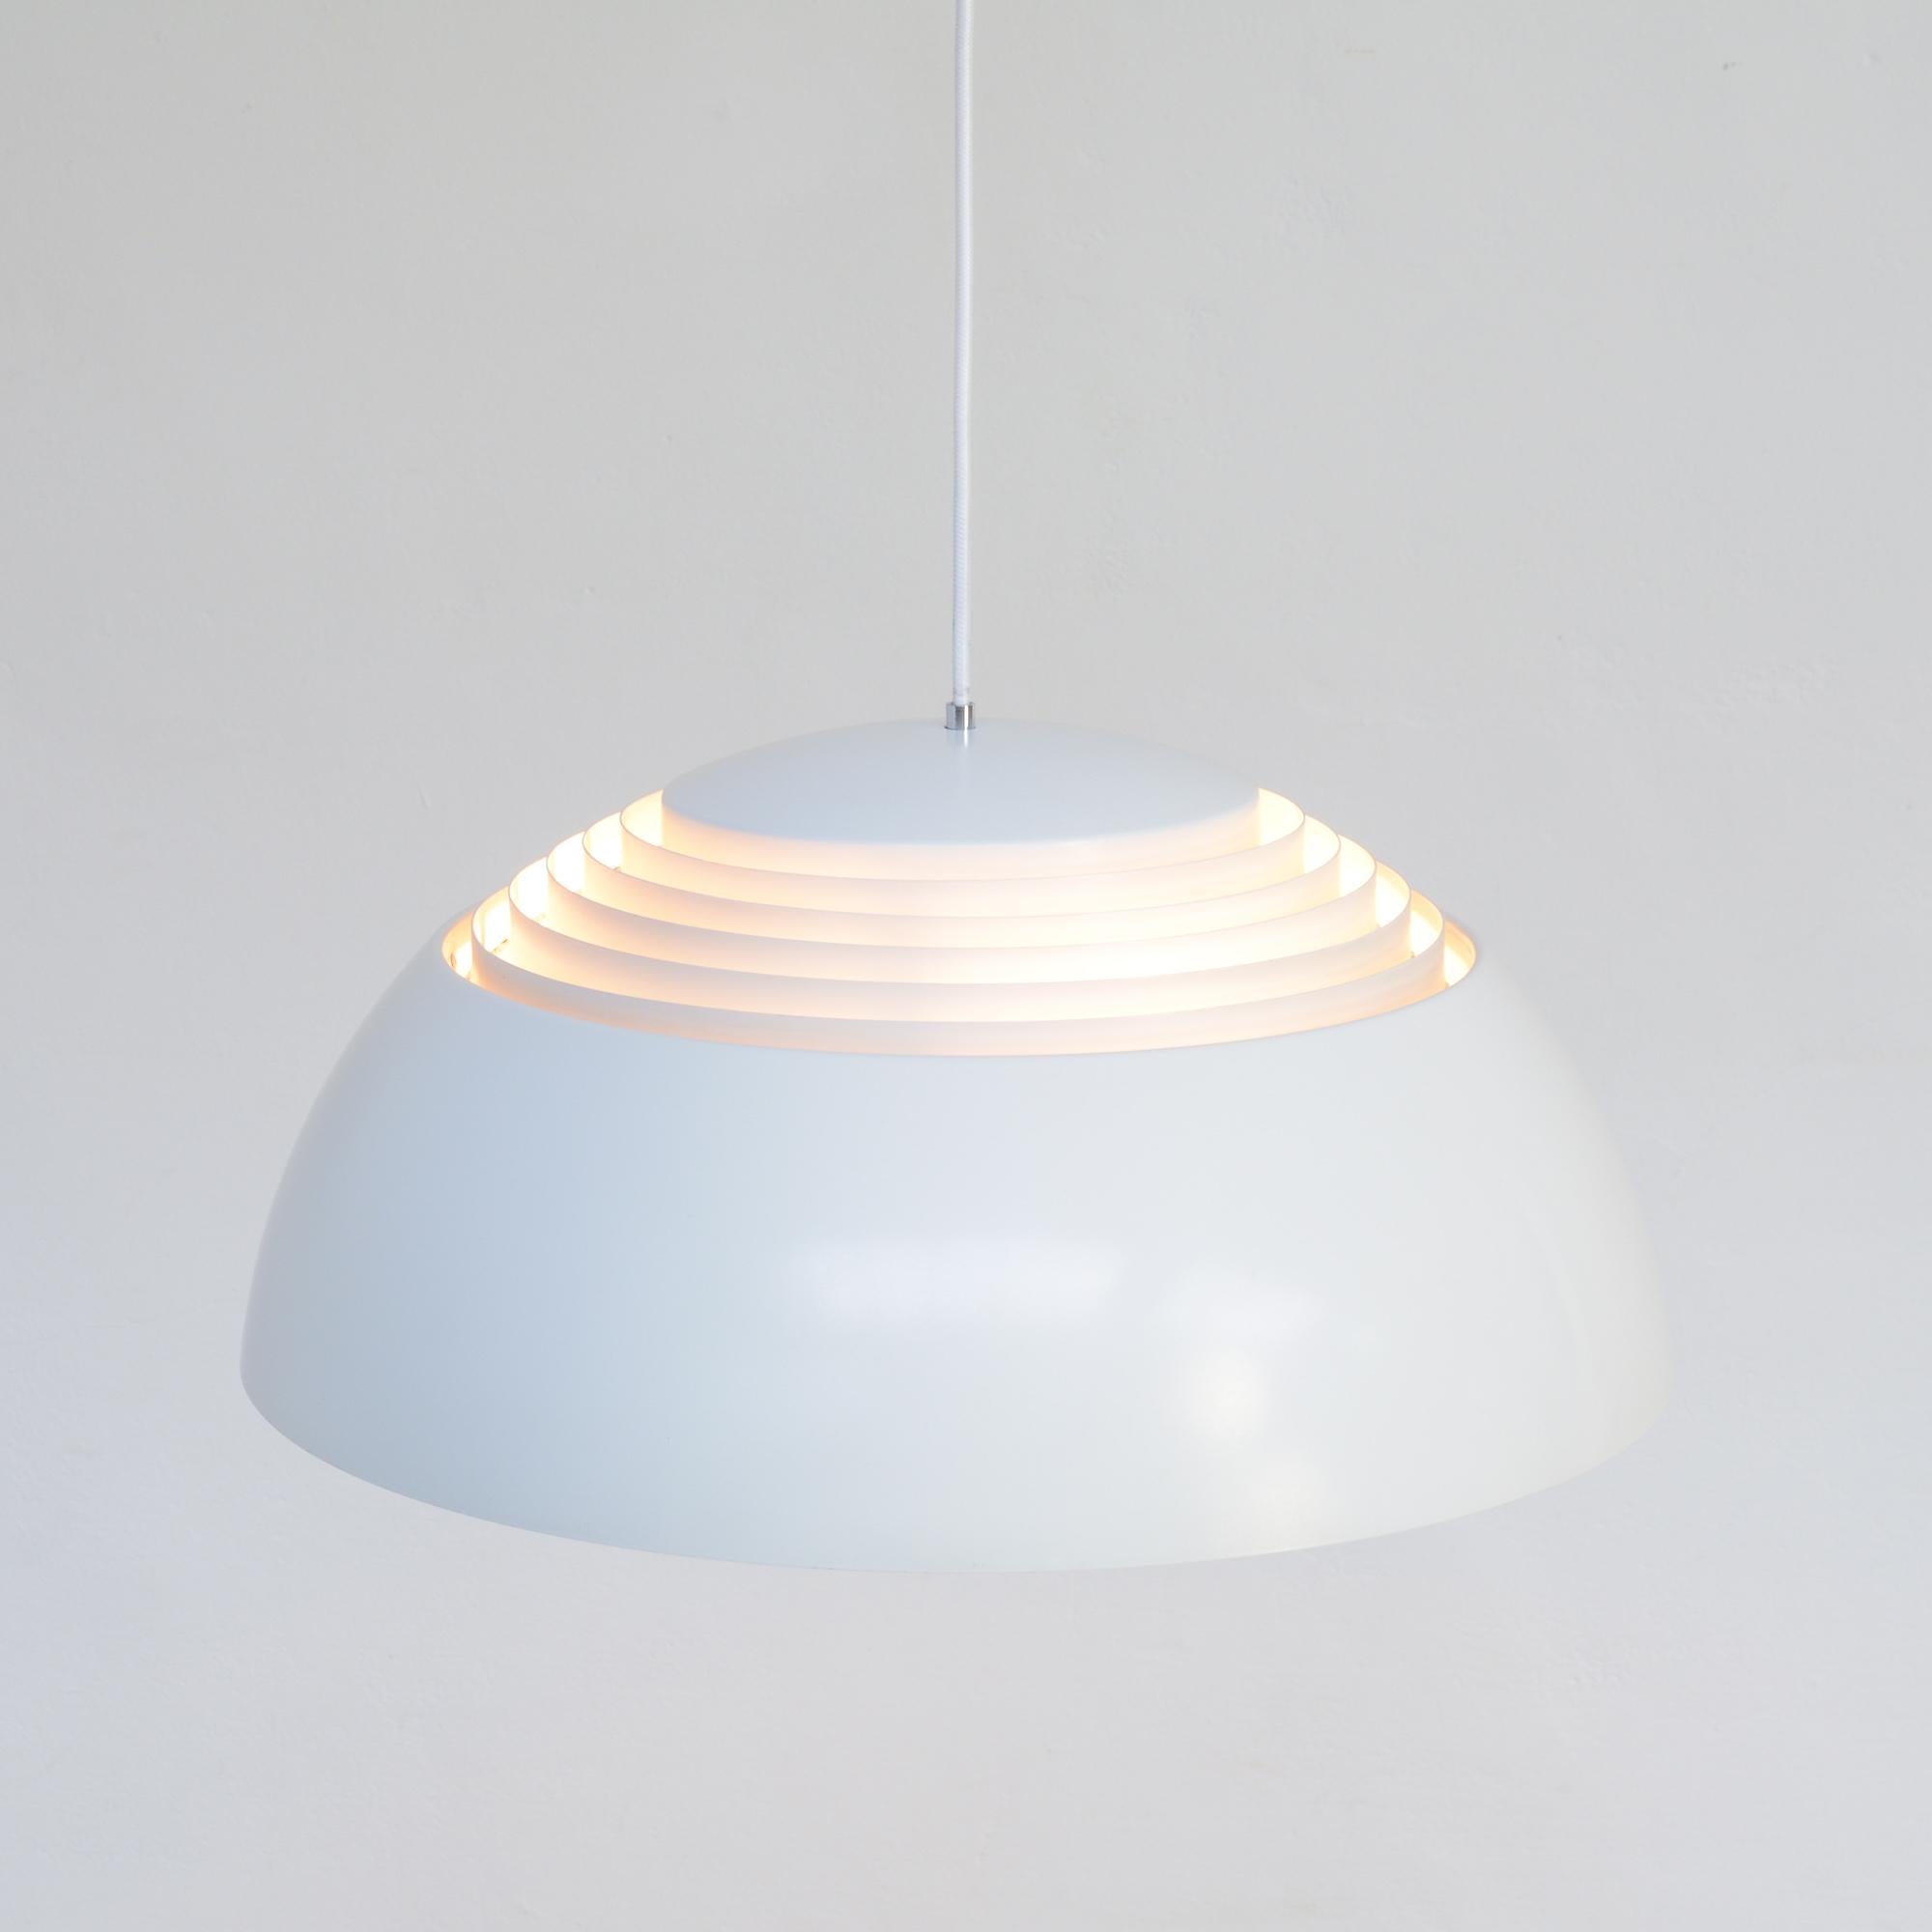 Arne Jacobsen designed the AJ Royal pendant lamp for the SAS Royal Hotel in Copenhagen in 1957. It was published by Louis Poulsen.
The metal shade is white lacquered. A white lacquered inner shade diffuses the light upwards and downwards, so this